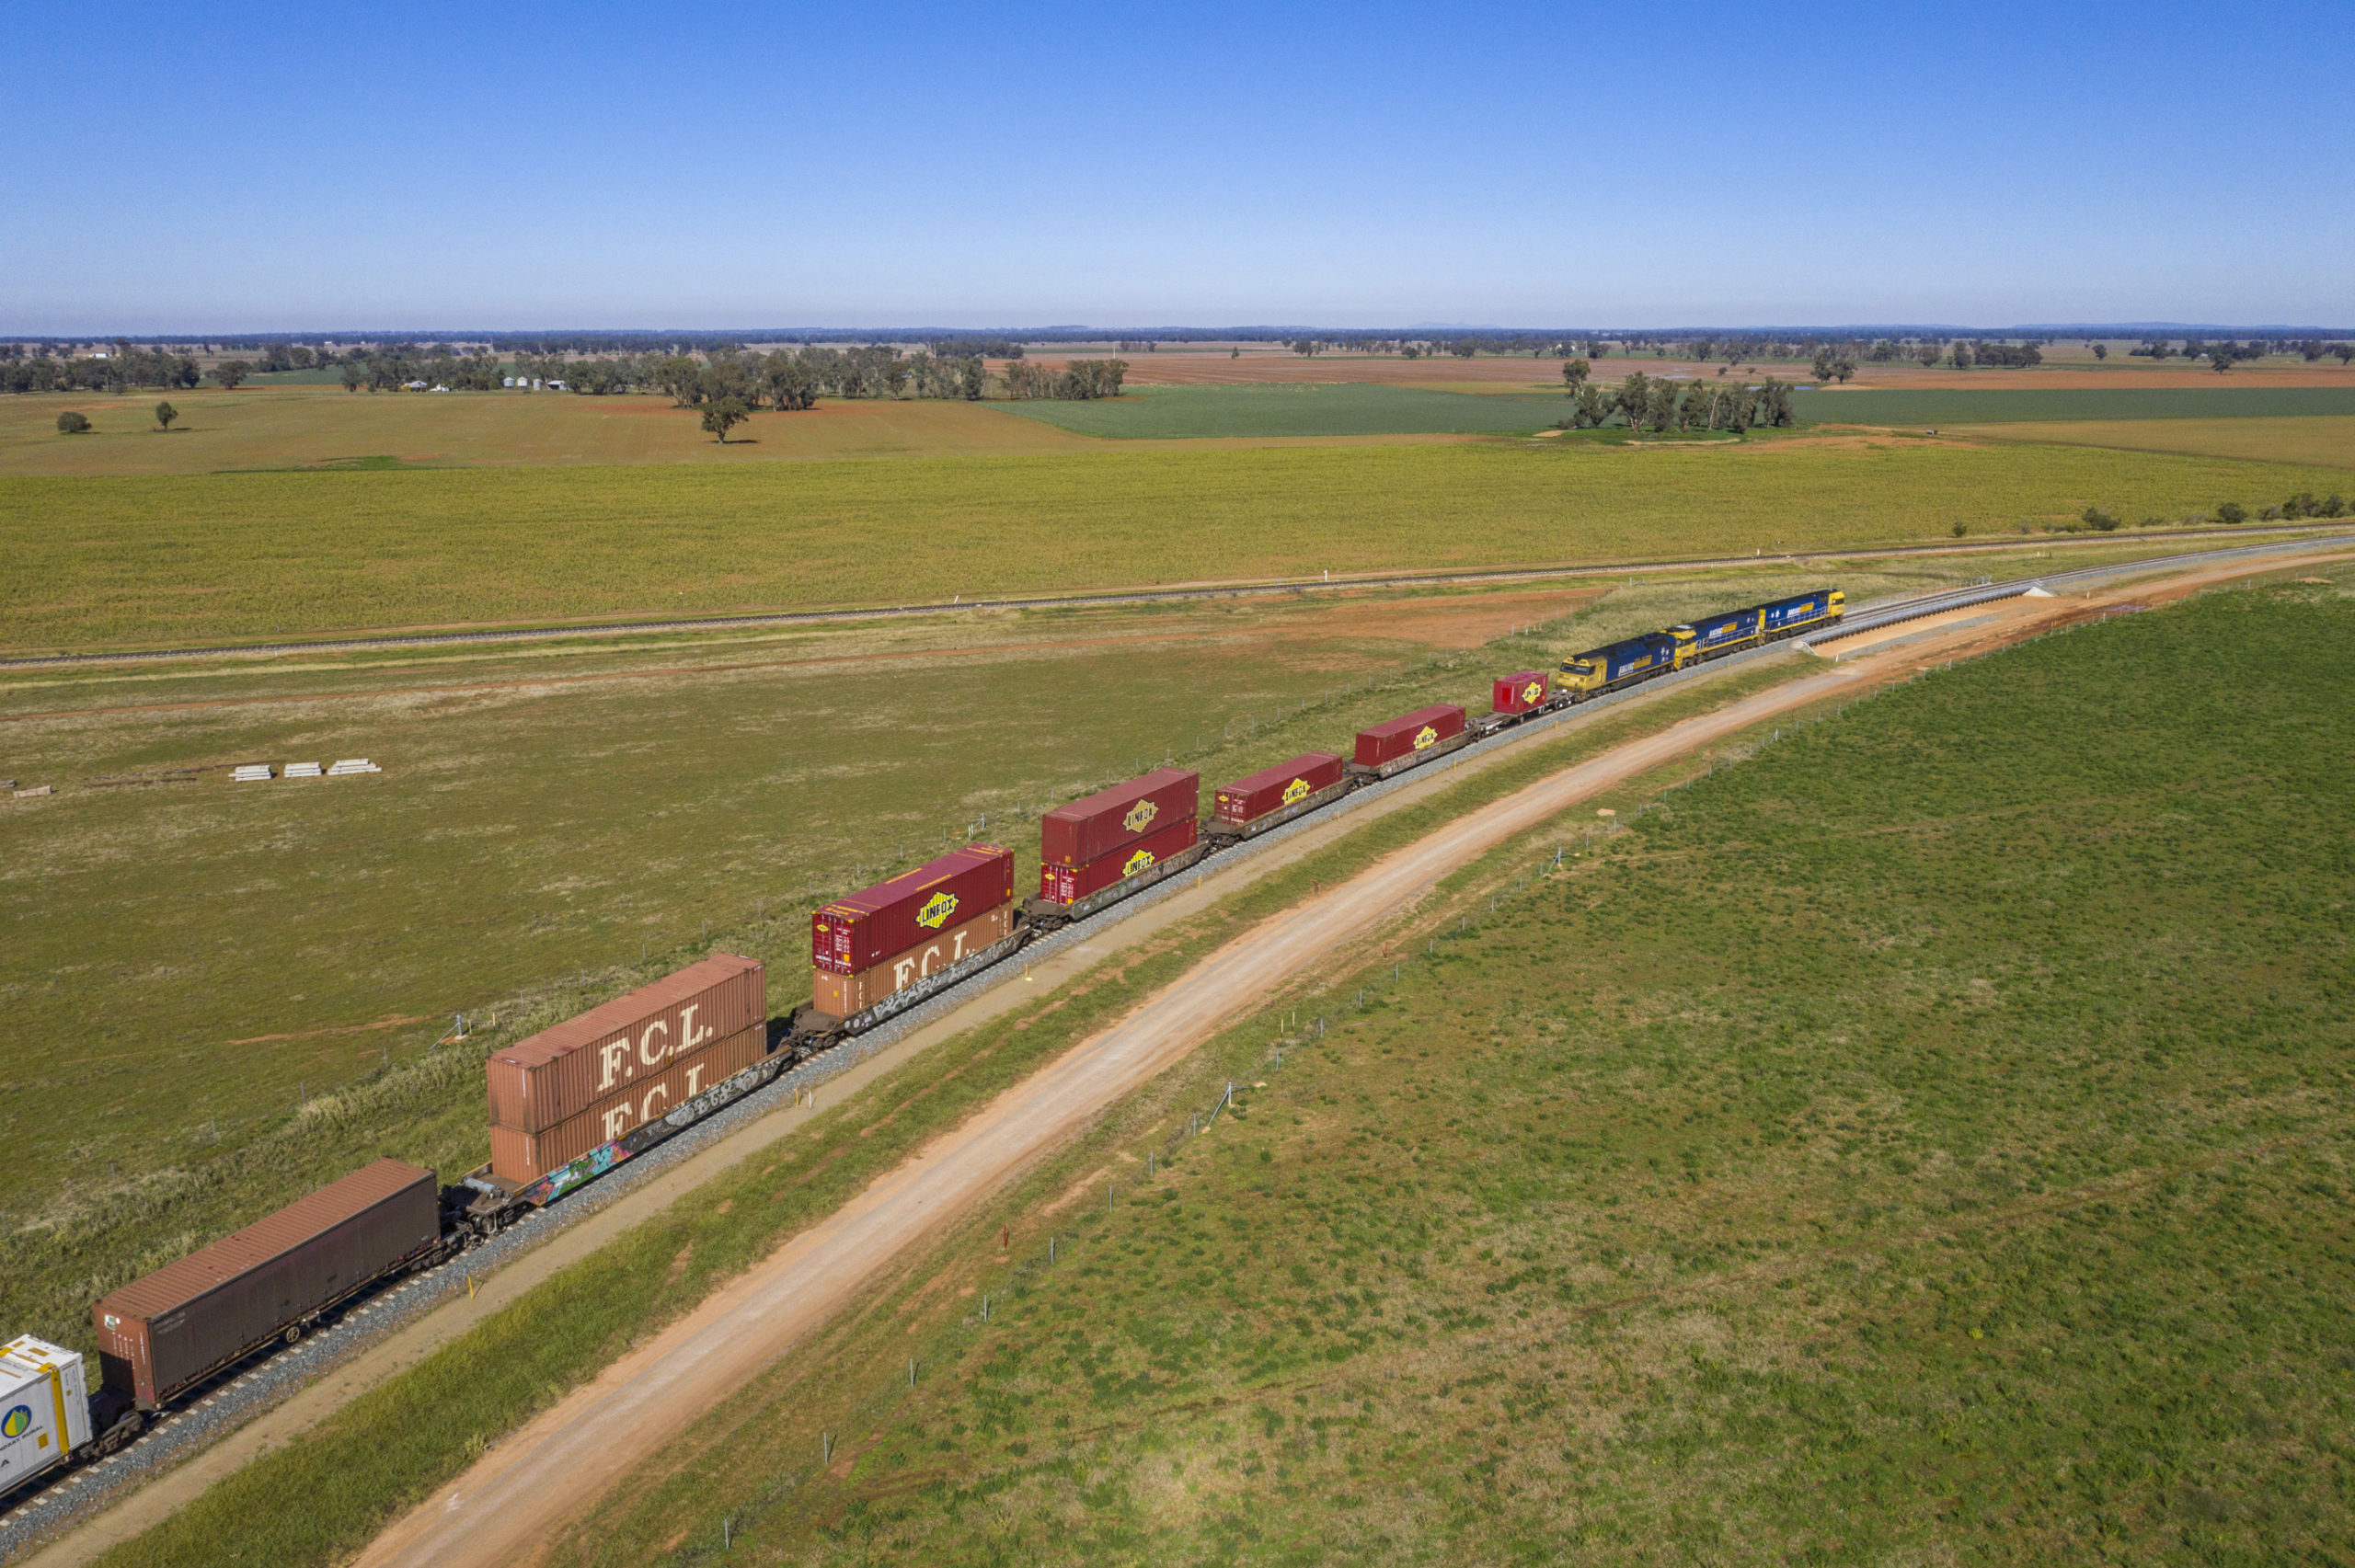 Aerial view of the double-stack container train travels through a rural area near Parkes, New South Wales